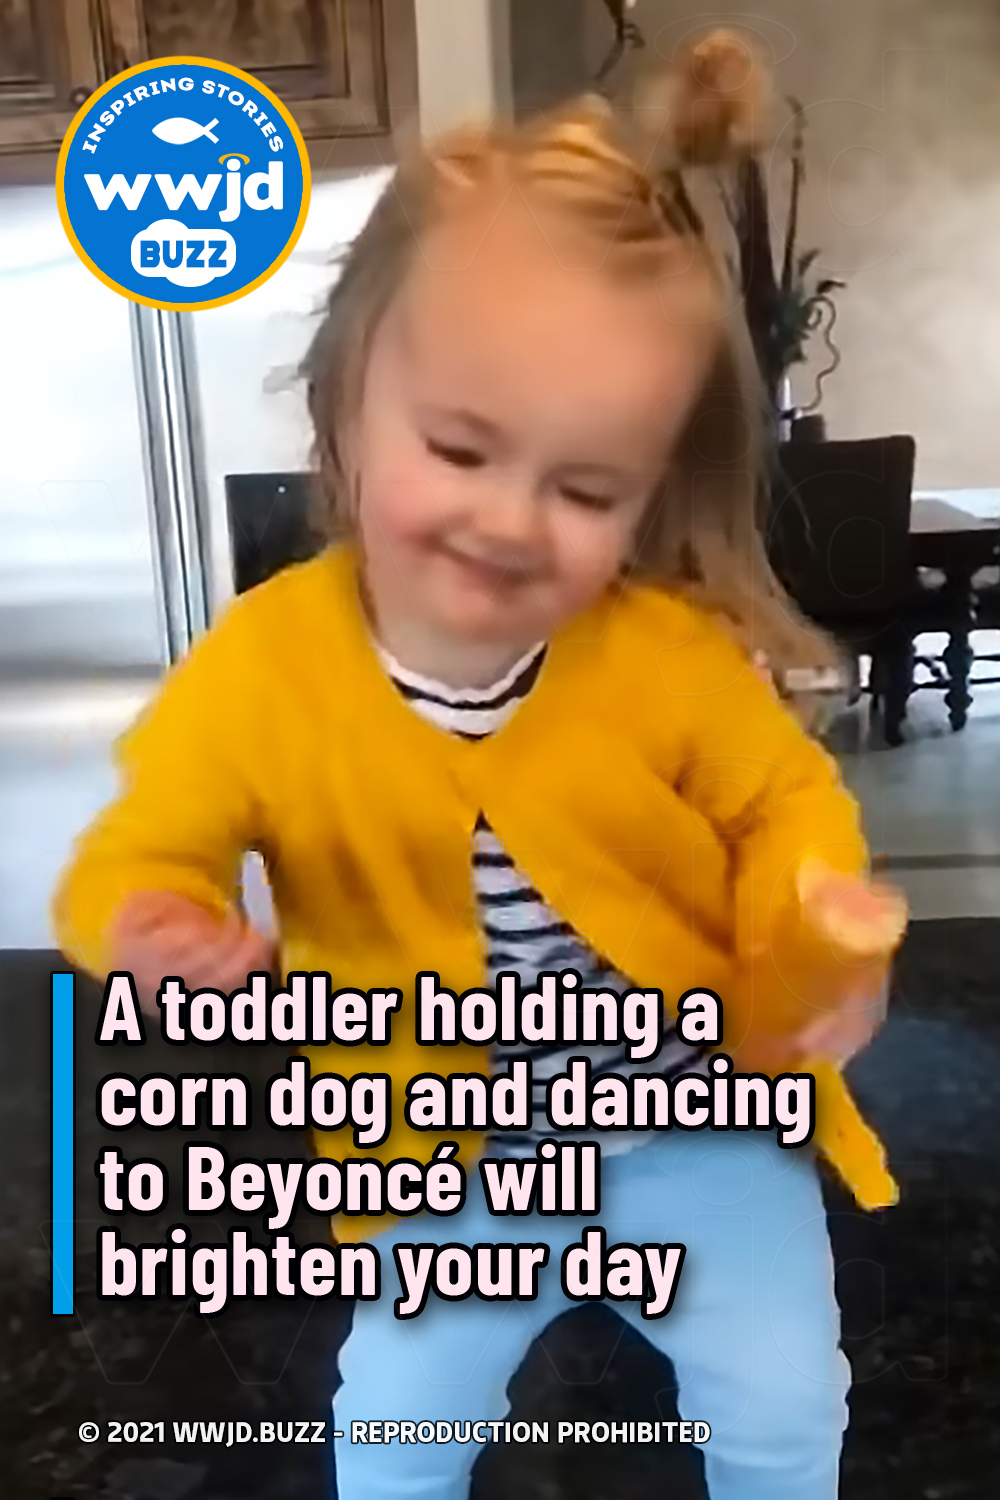 A toddler holding a corn dog and dancing to Beyoncé will brighten your day